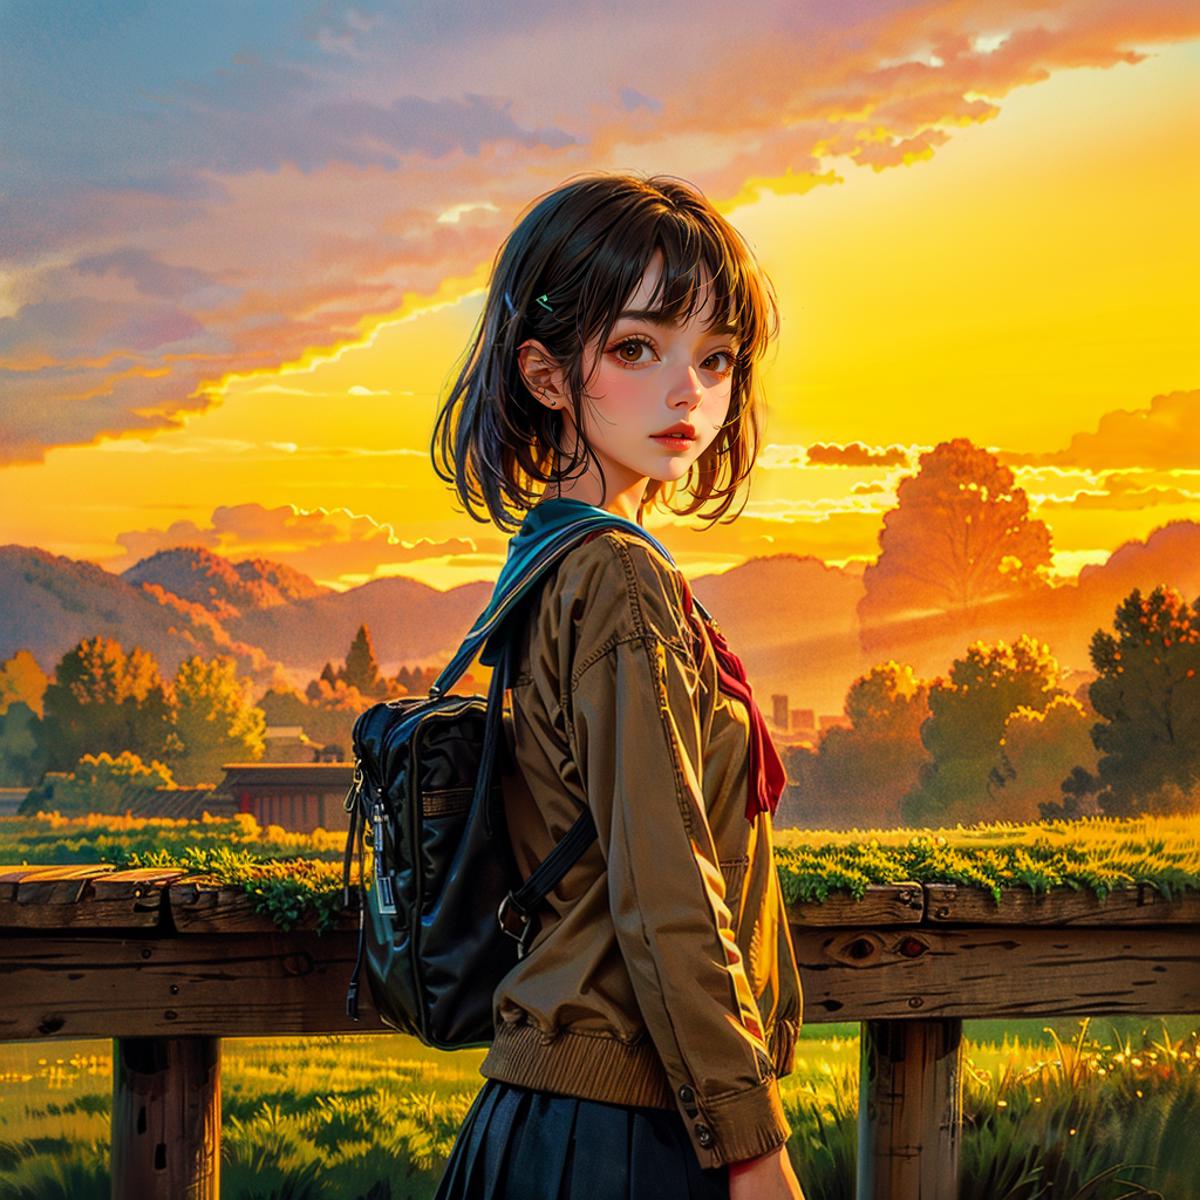 A girl with a backpack and a red tie stands on a fence overlooking a field.